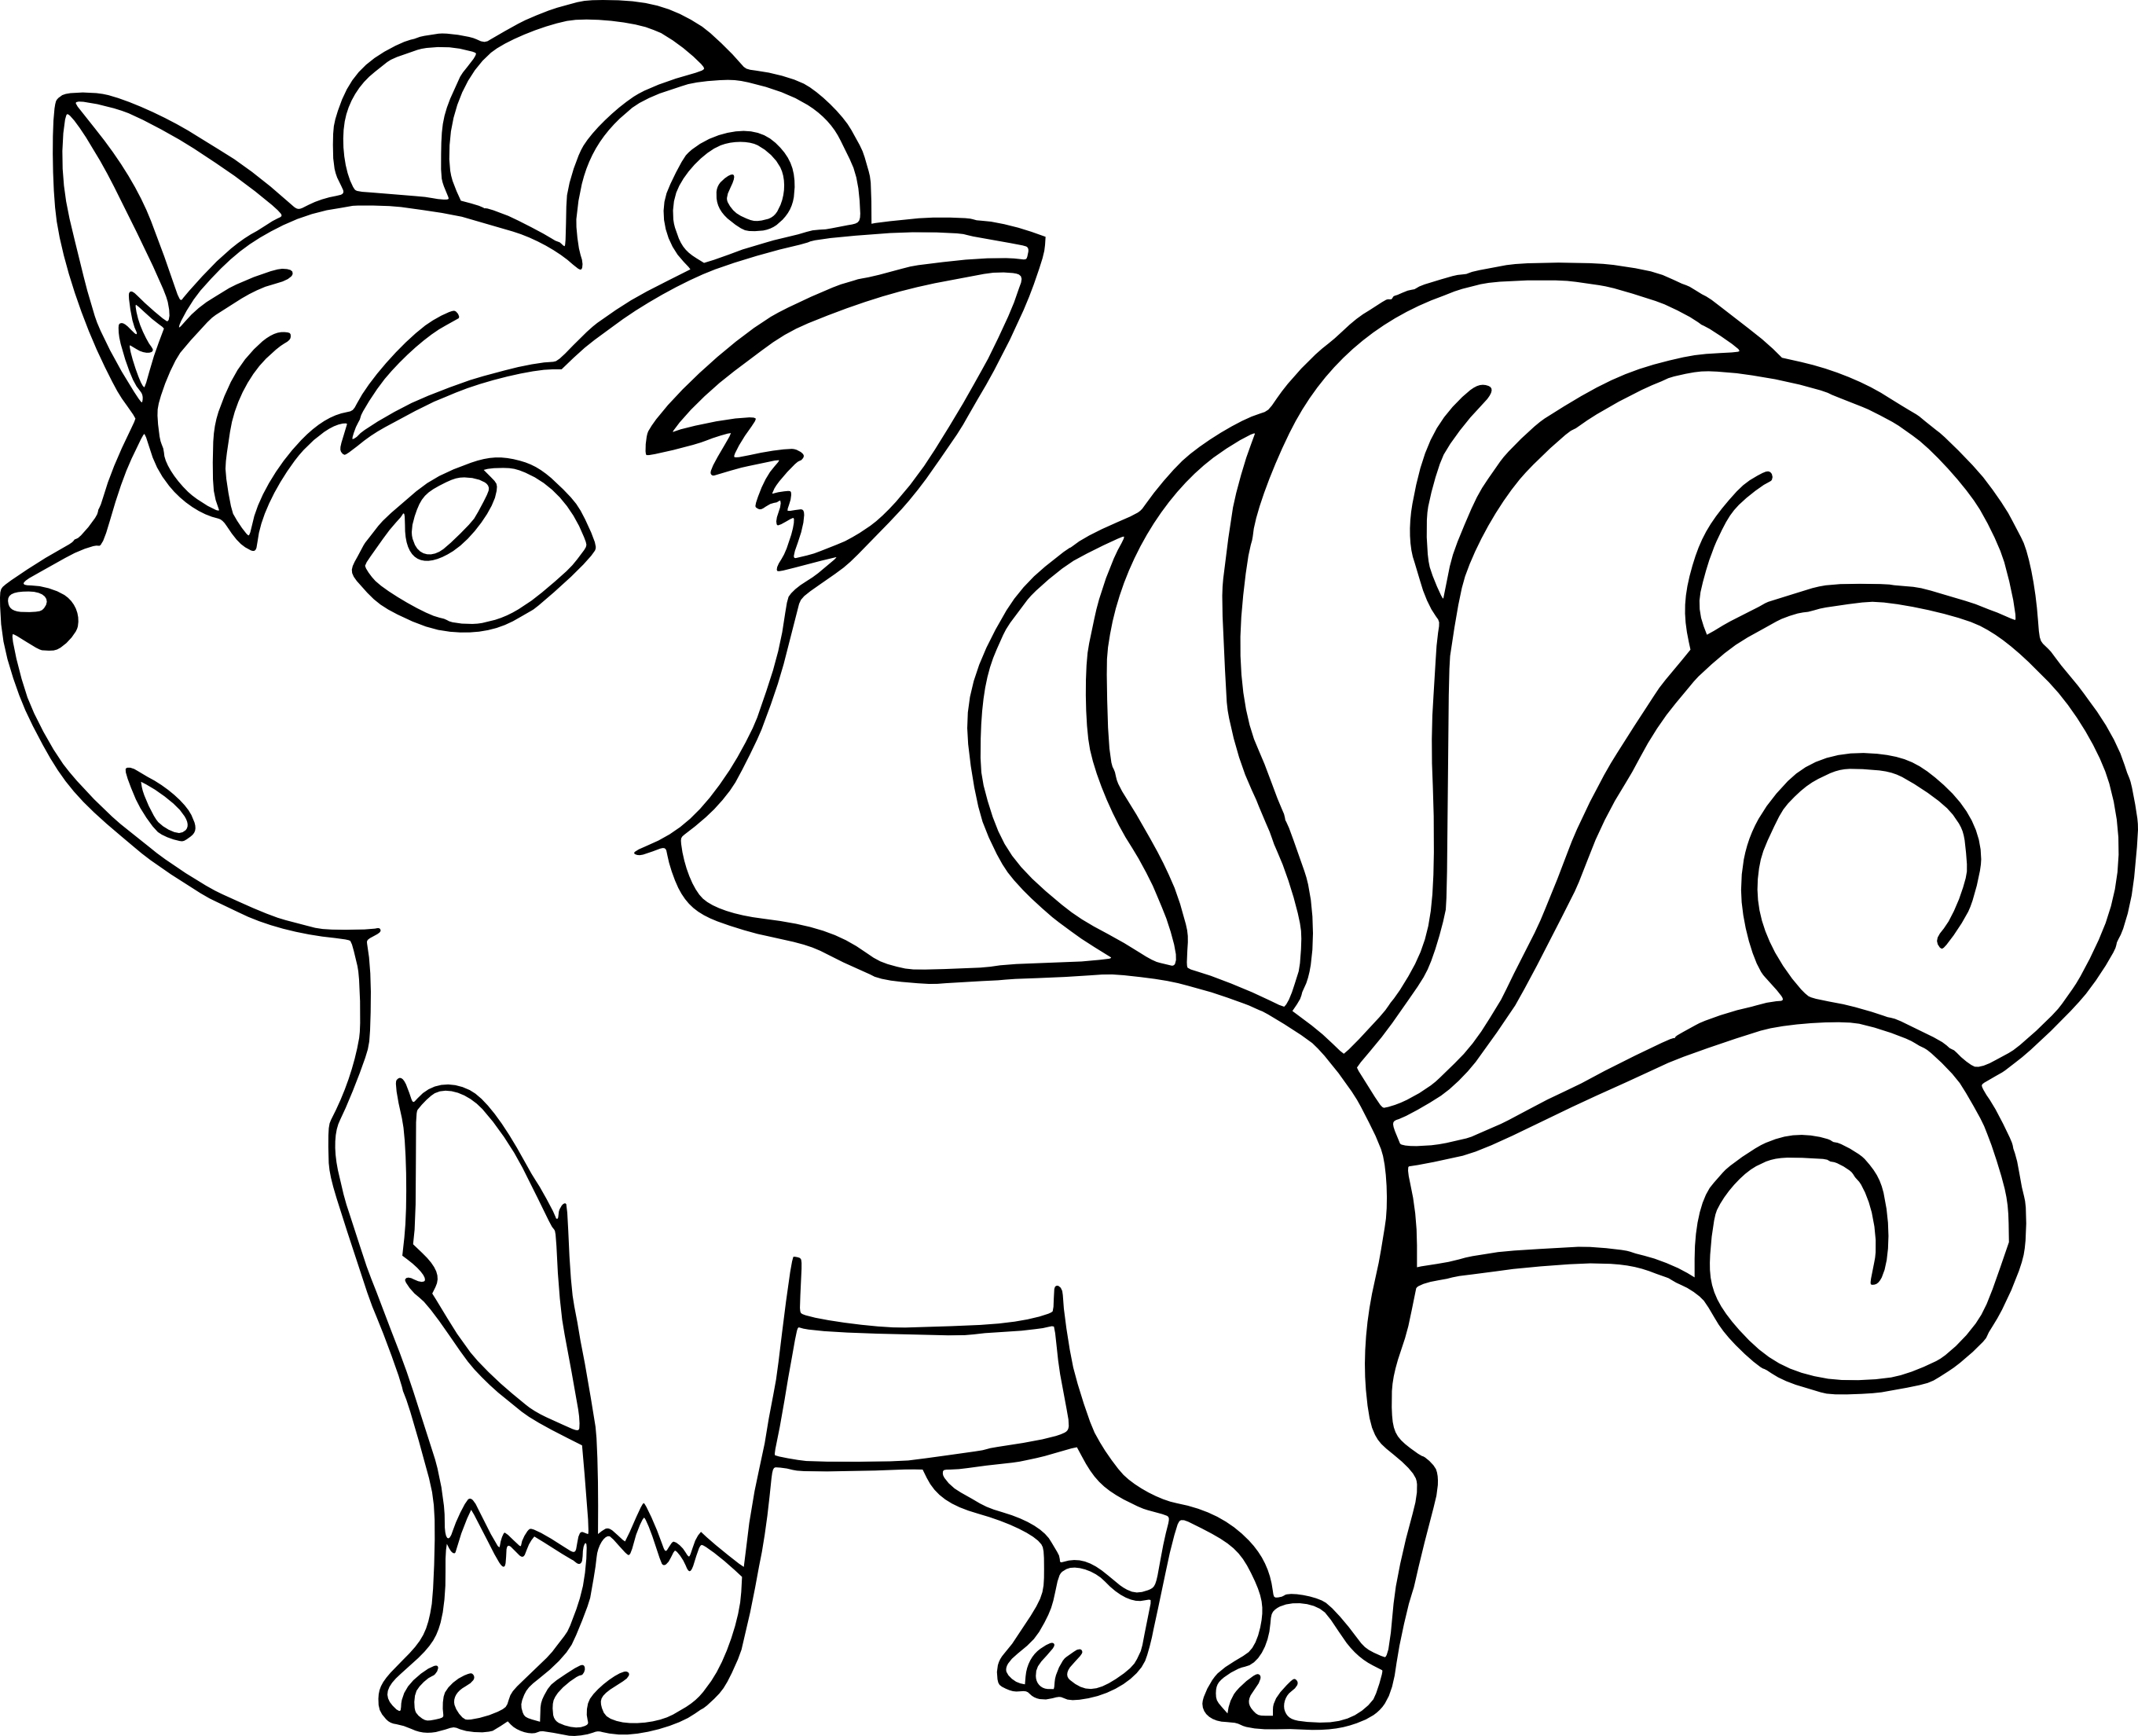 Fire Type Pokemon Coloring Pages at GetColorings.com  Free printable